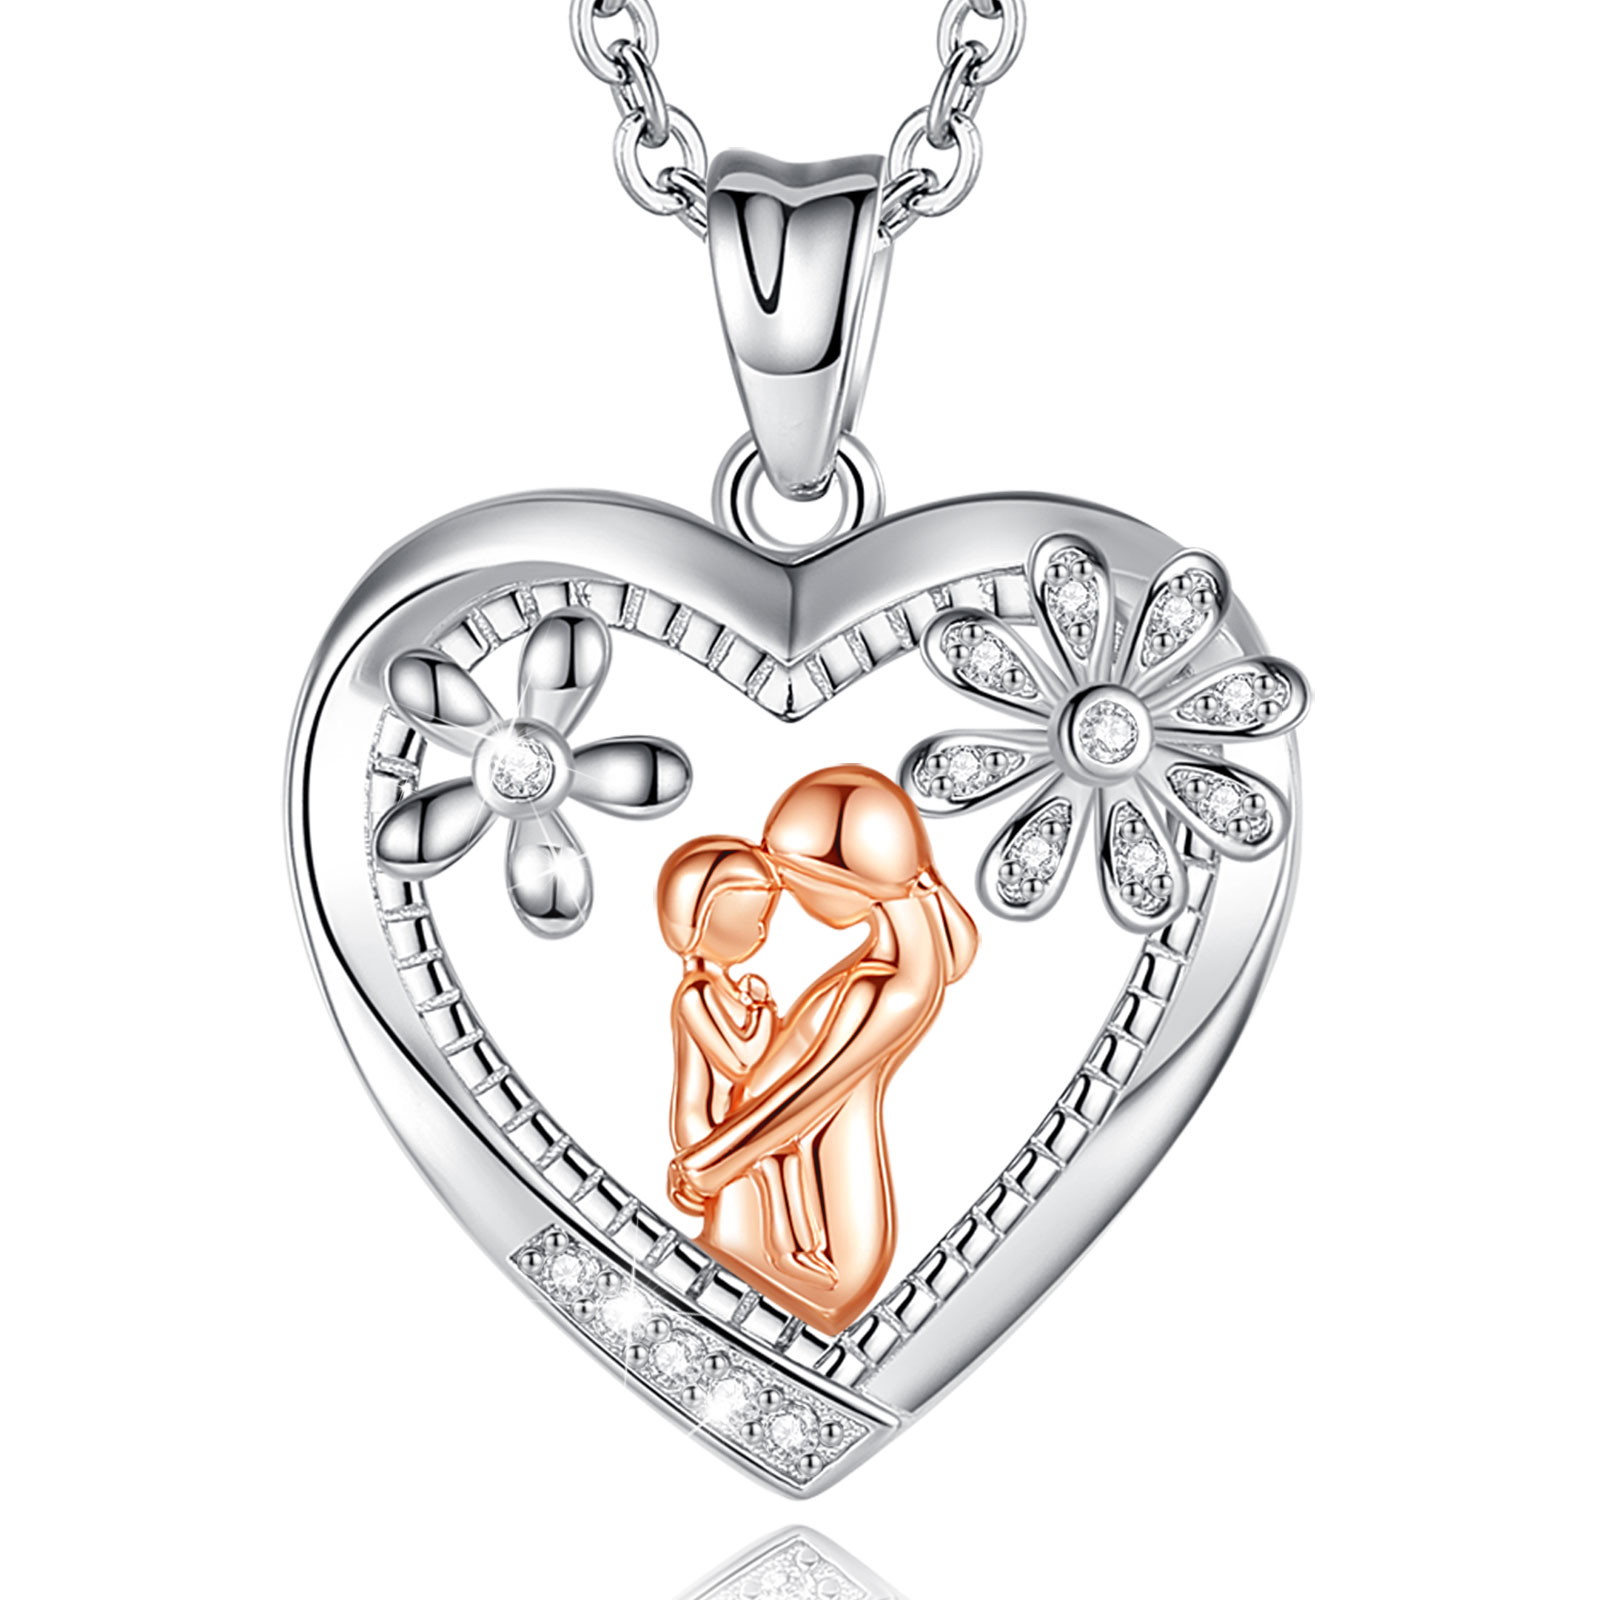 Merryshine Jewelry Mom and Daughter S925 Sterling Silver Heart Shape Pendant Necklace